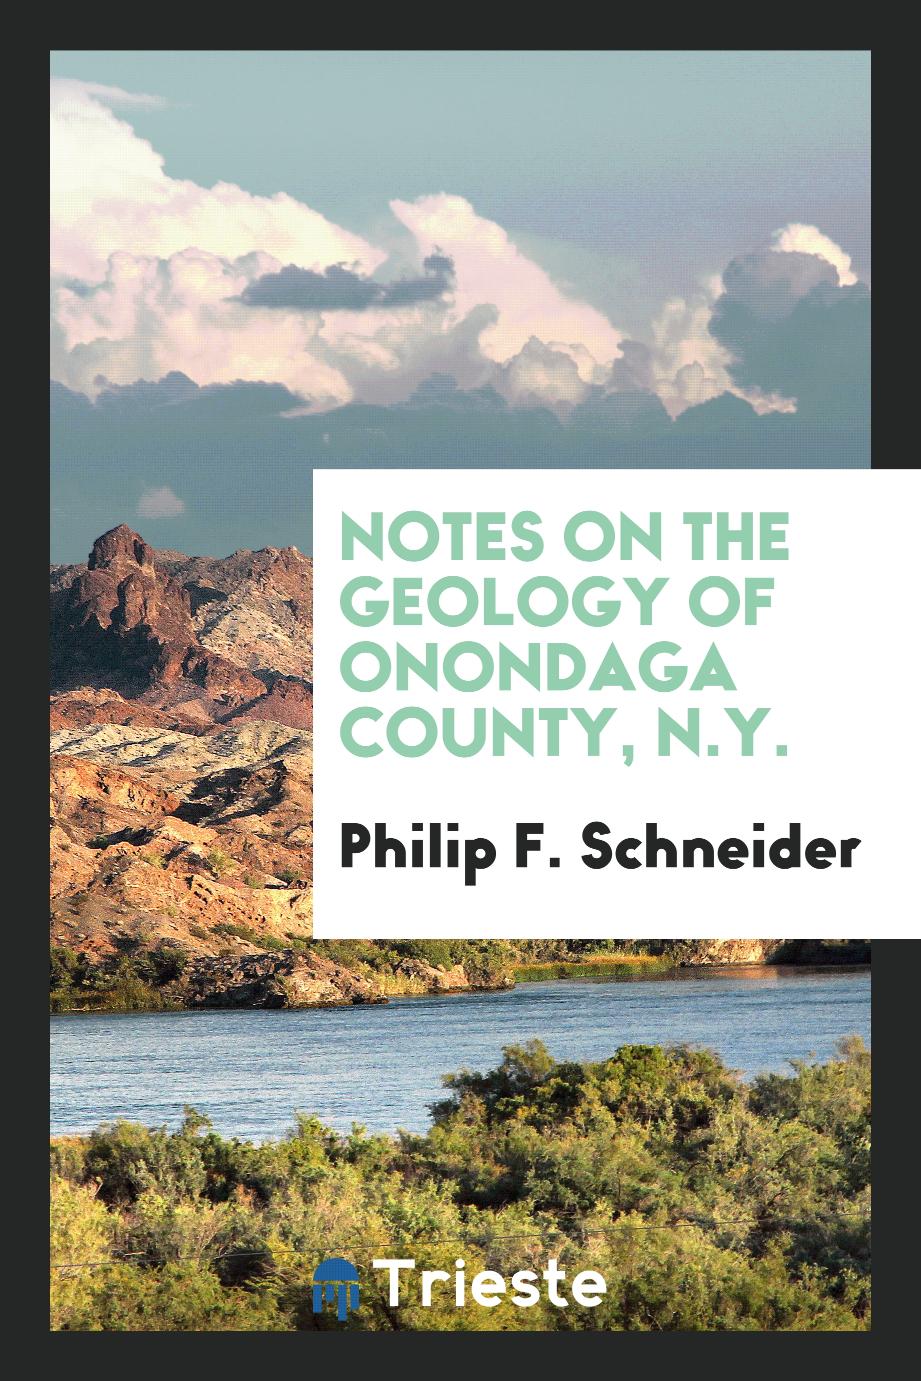 Notes on the Geology of Onondaga County, N.Y.